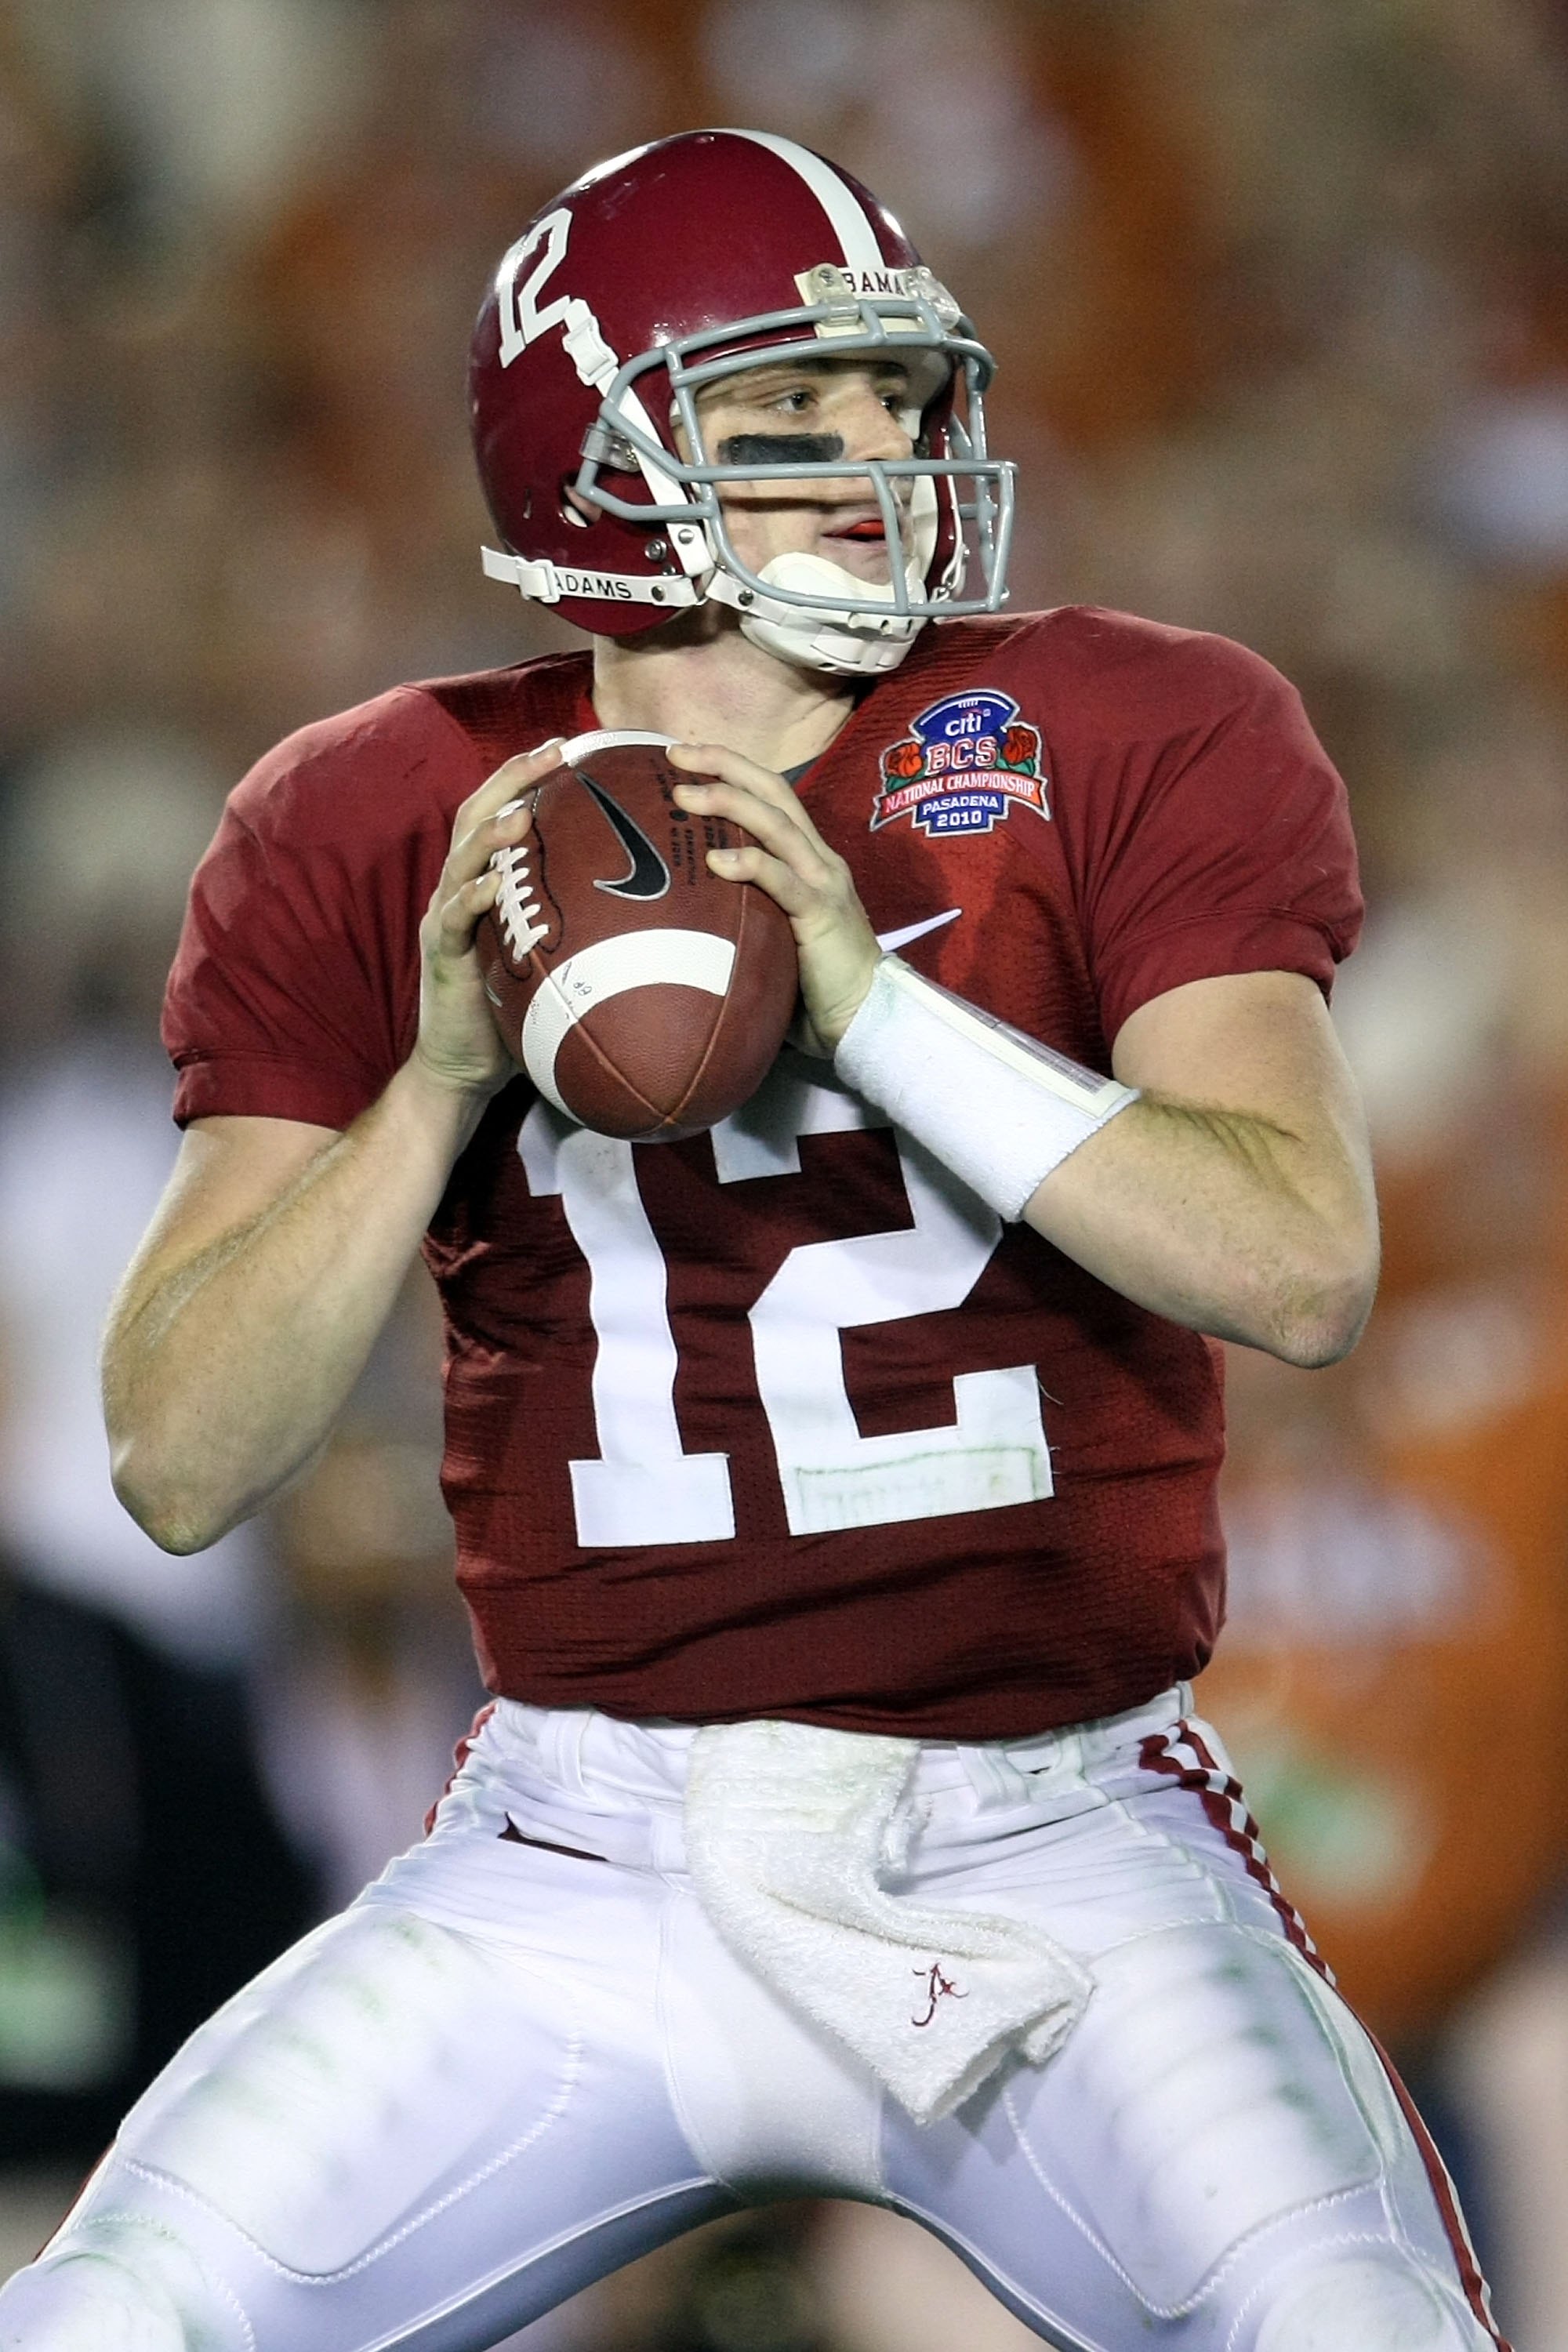 PASADENA, CA - JANUARY 07:  Quarterback Greg McElroy #12 of the Alabama Crimson Tide throws the ball against the Texas Longhorns in the second half of the Citi BCS National Championship game at the Rose Bowl on January 7, 2010 in Pasadena, California.  (P